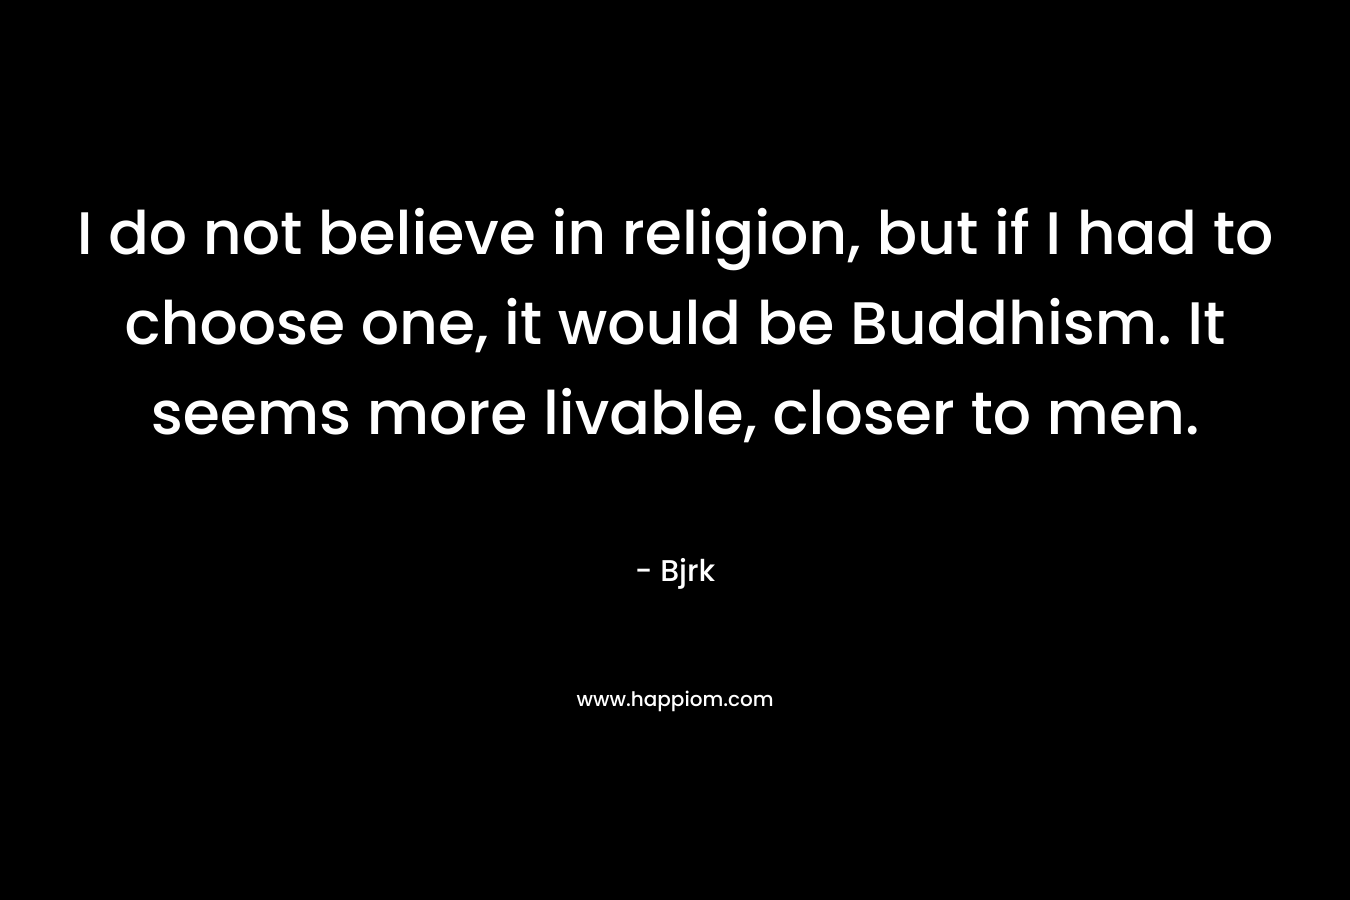 I do not believe in religion, but if I had to choose one, it would be Buddhism. It seems more livable, closer to men.